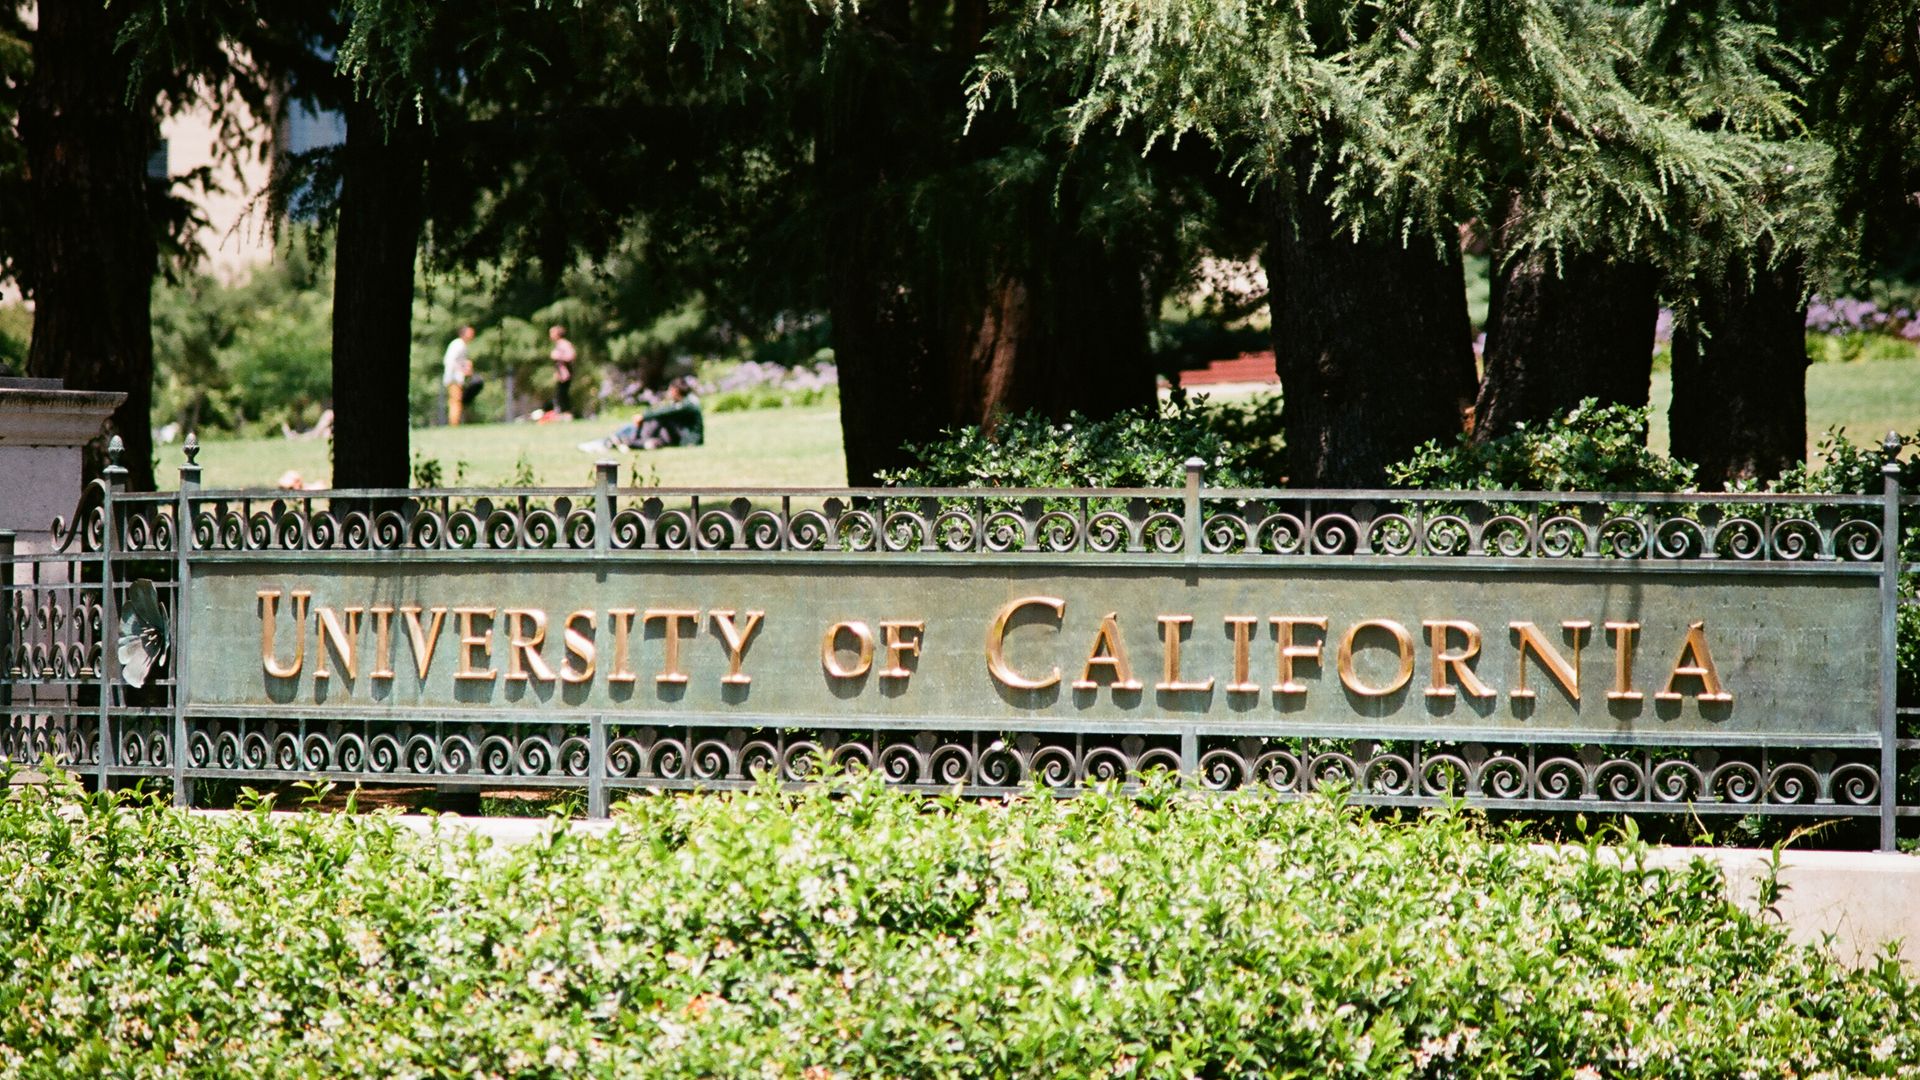 Signage outside the University of California, Berkeley in July 2017.